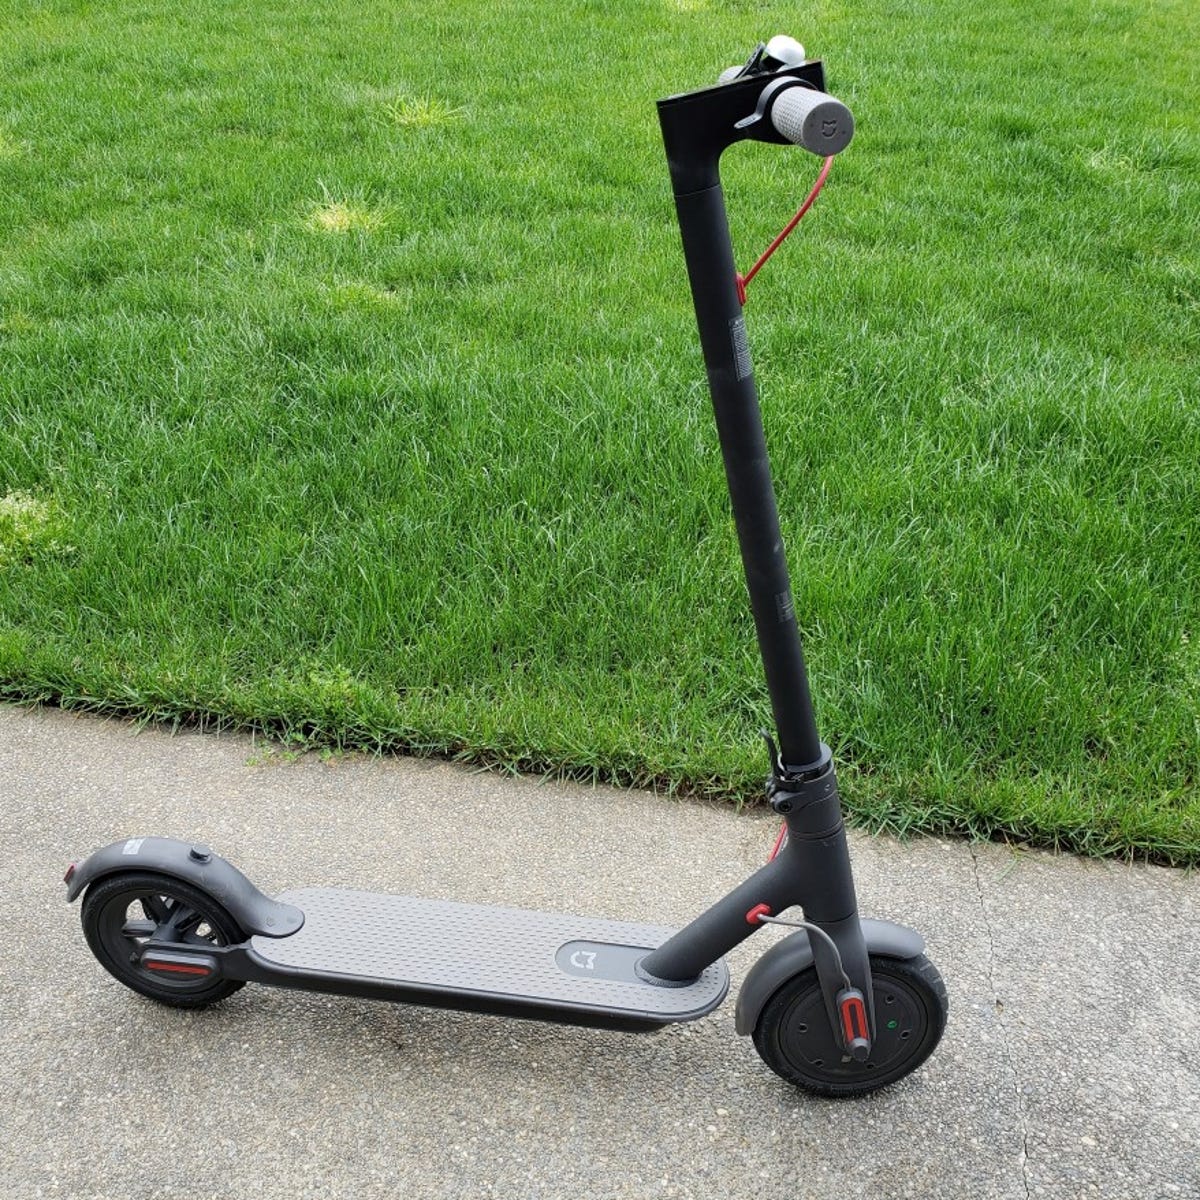 Klan syreindhold Guggenheim Museum Mi Electric Scooter review: Complete that last mile commute with ease |  ZDNET